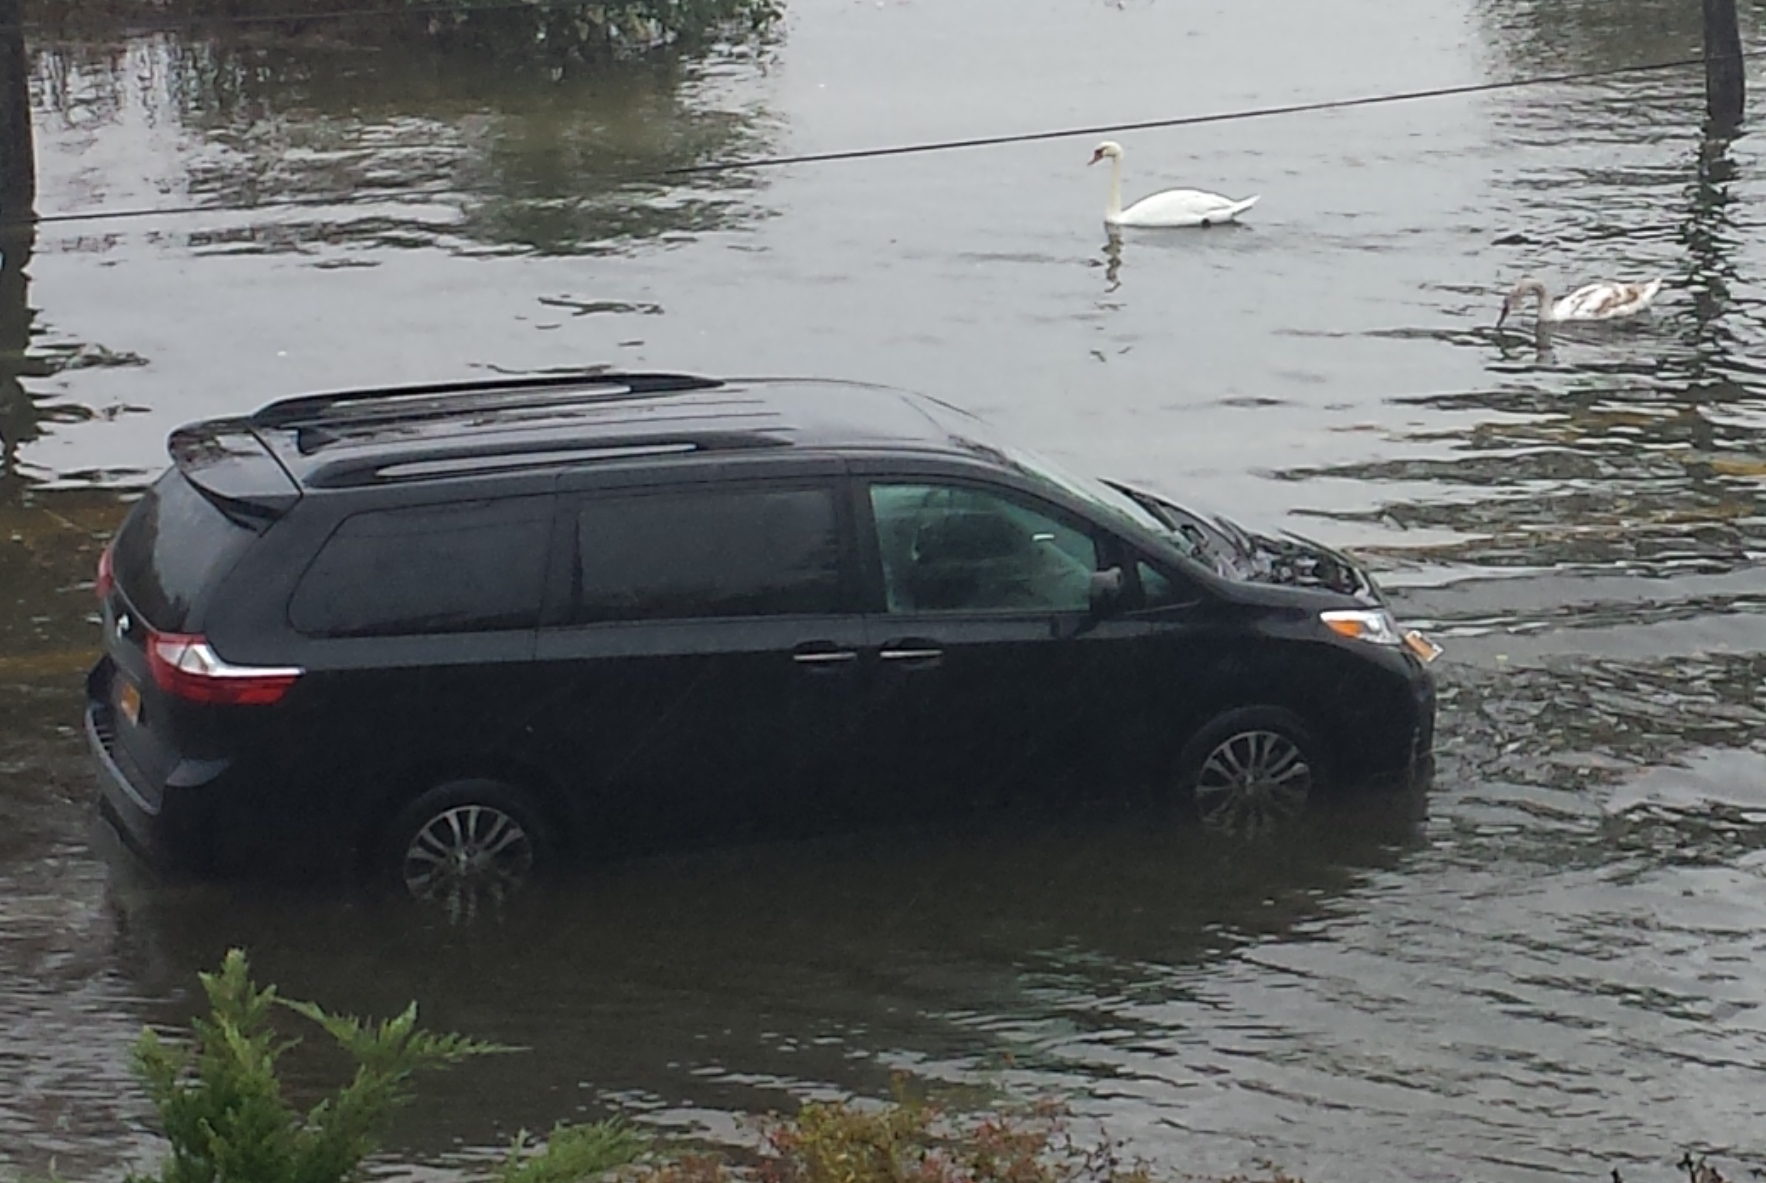 A van flooded when attempting to drive on Shore Road during a recent rainstorm. (Photo courtesy of Baxter Estates resident Maria Branco)